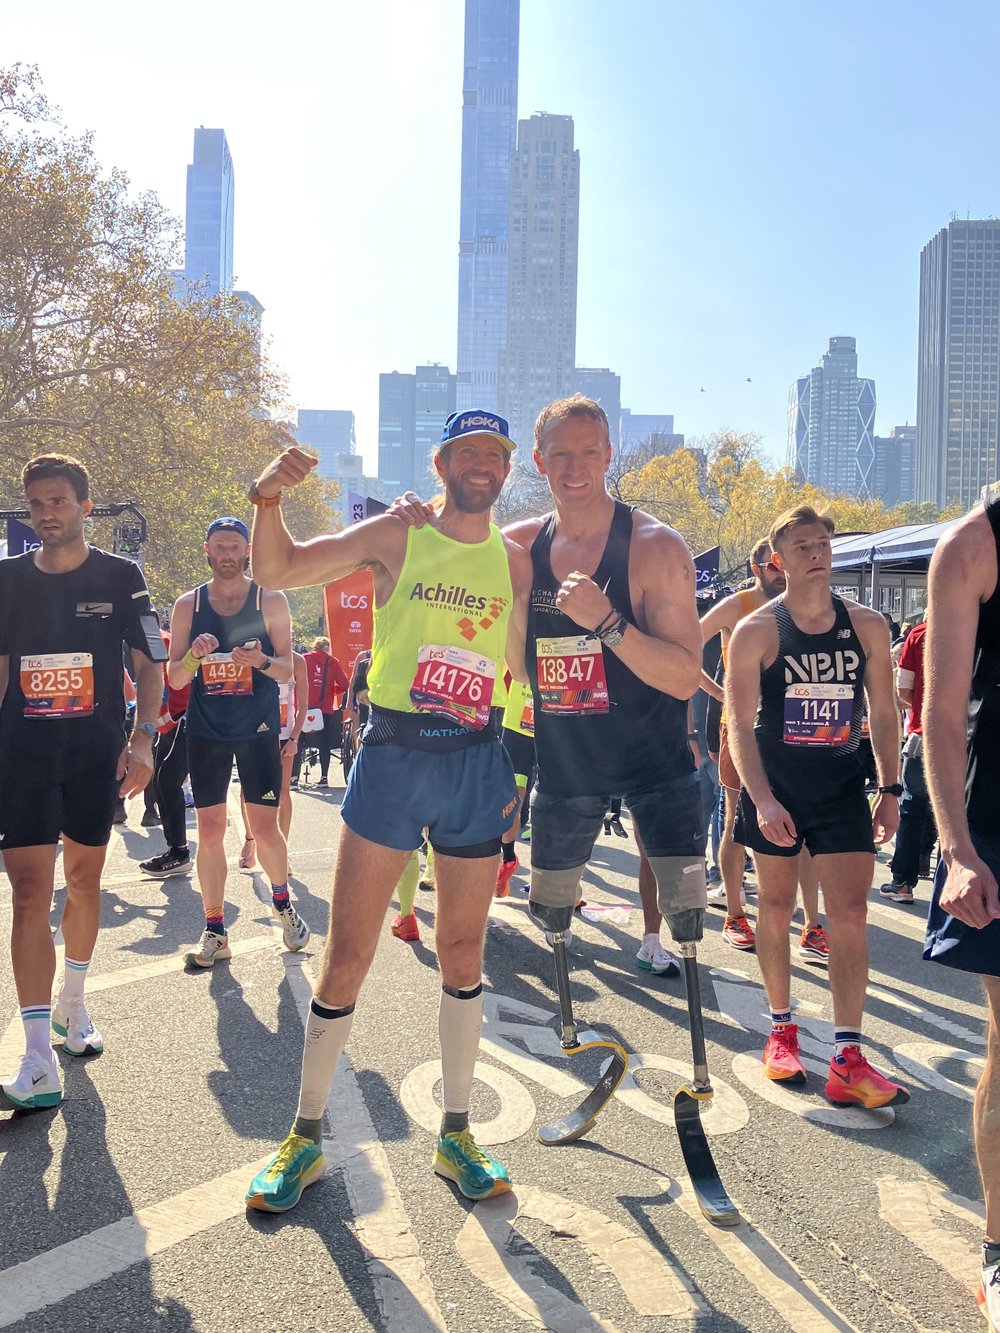  Mike Wardian and Richard Whitehead posing together at the NYC Marathon finish line  